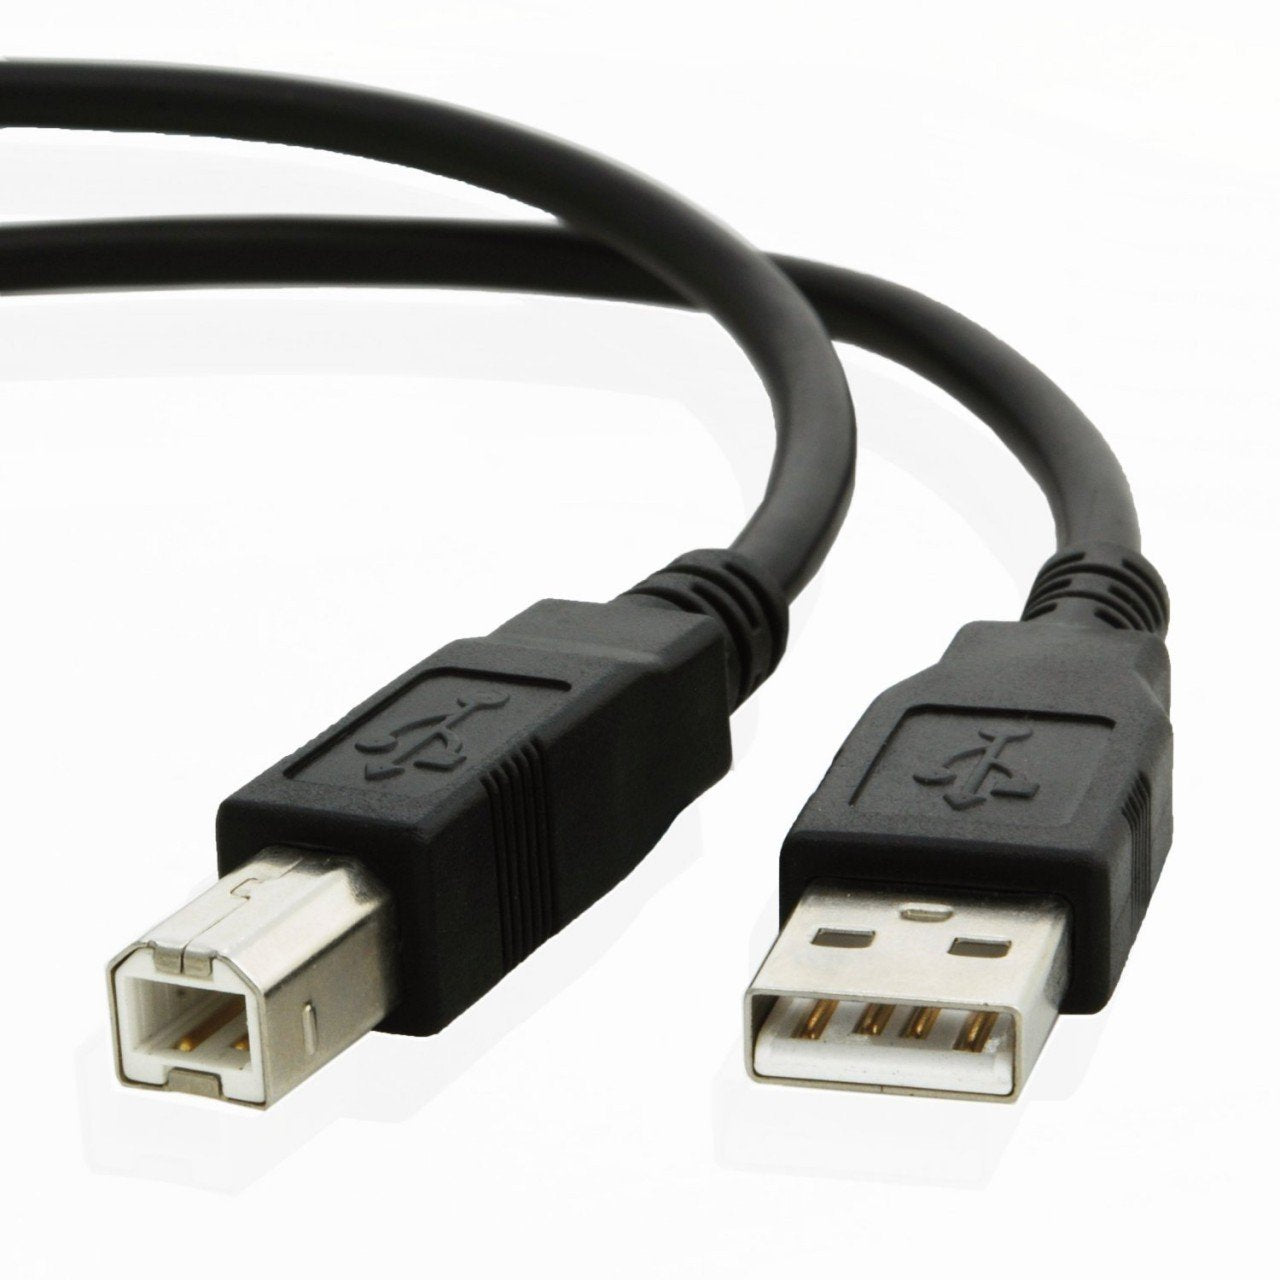 USB cable for Epson OMNILINK TM-T70II